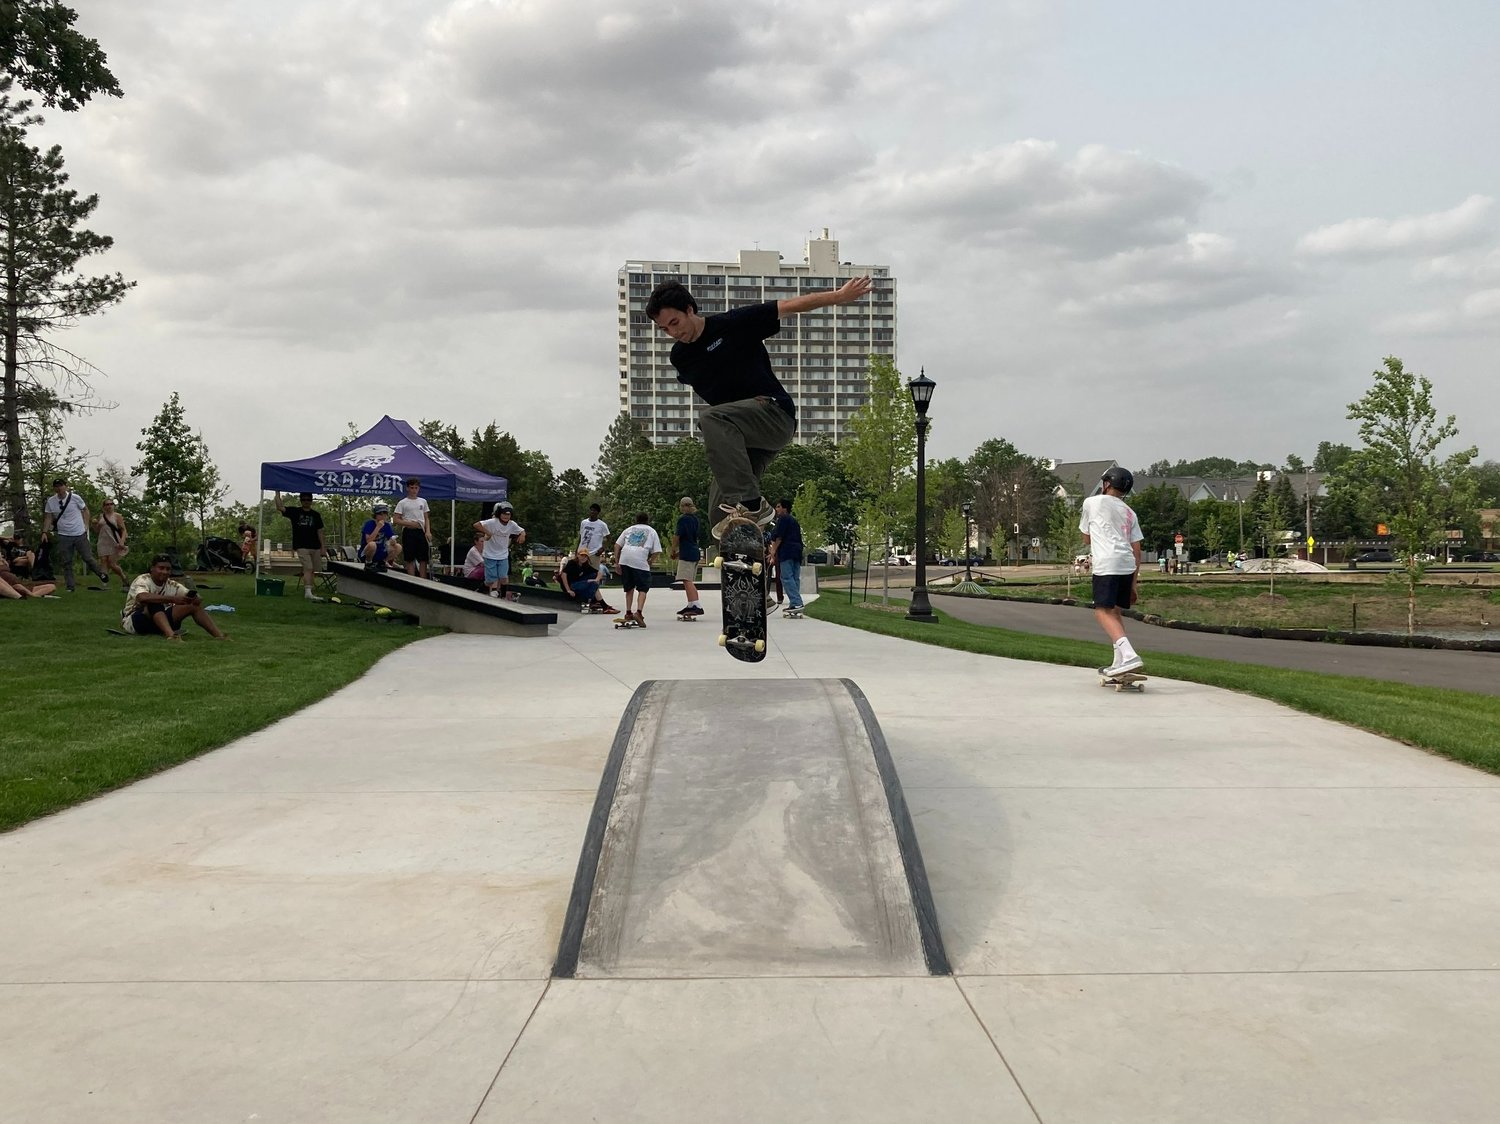 On June 14, the new skate park and skater trail at Highland Bridge officially opened. (Photo courtesy of Saint Paul Parks and Recreation)